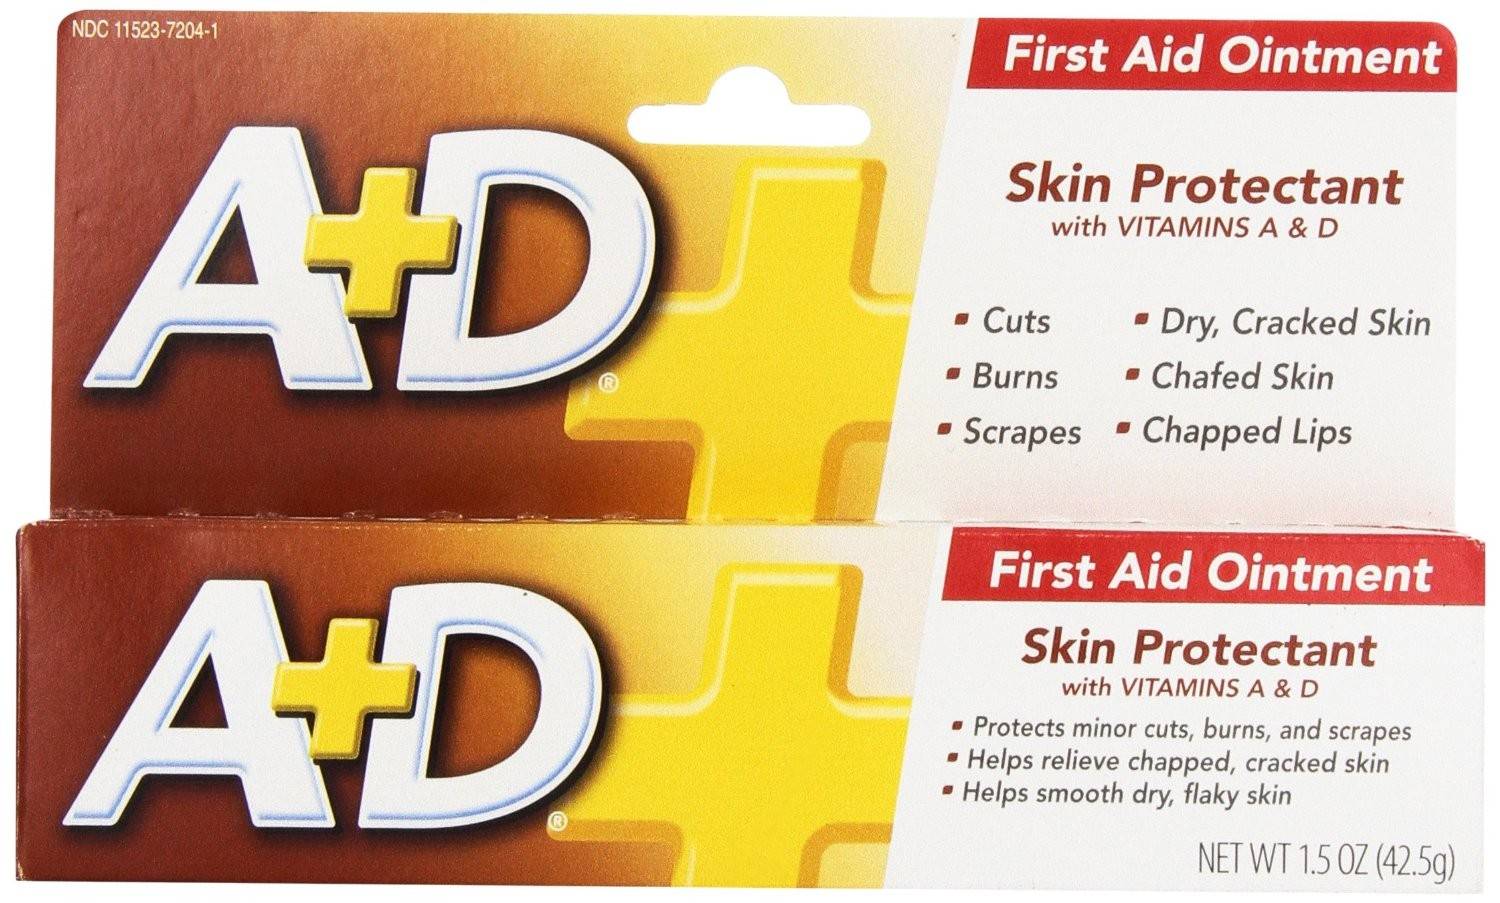 A+D First Aid Ointment & Skin Protectant (1.5 oz)